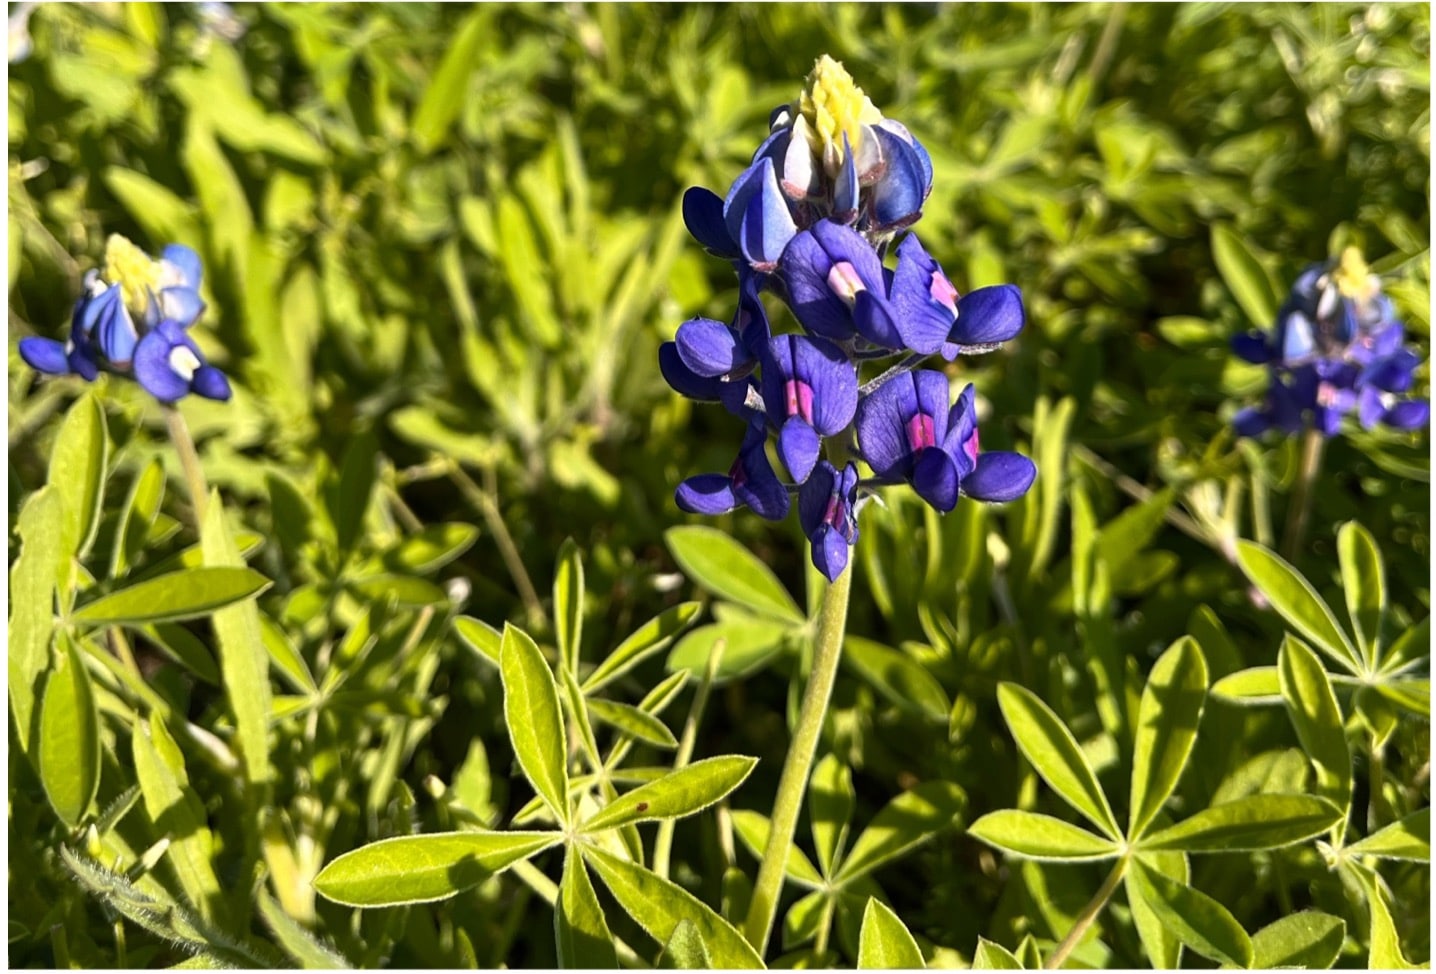 Bluebonnet | The Iconic State Flower of Texas